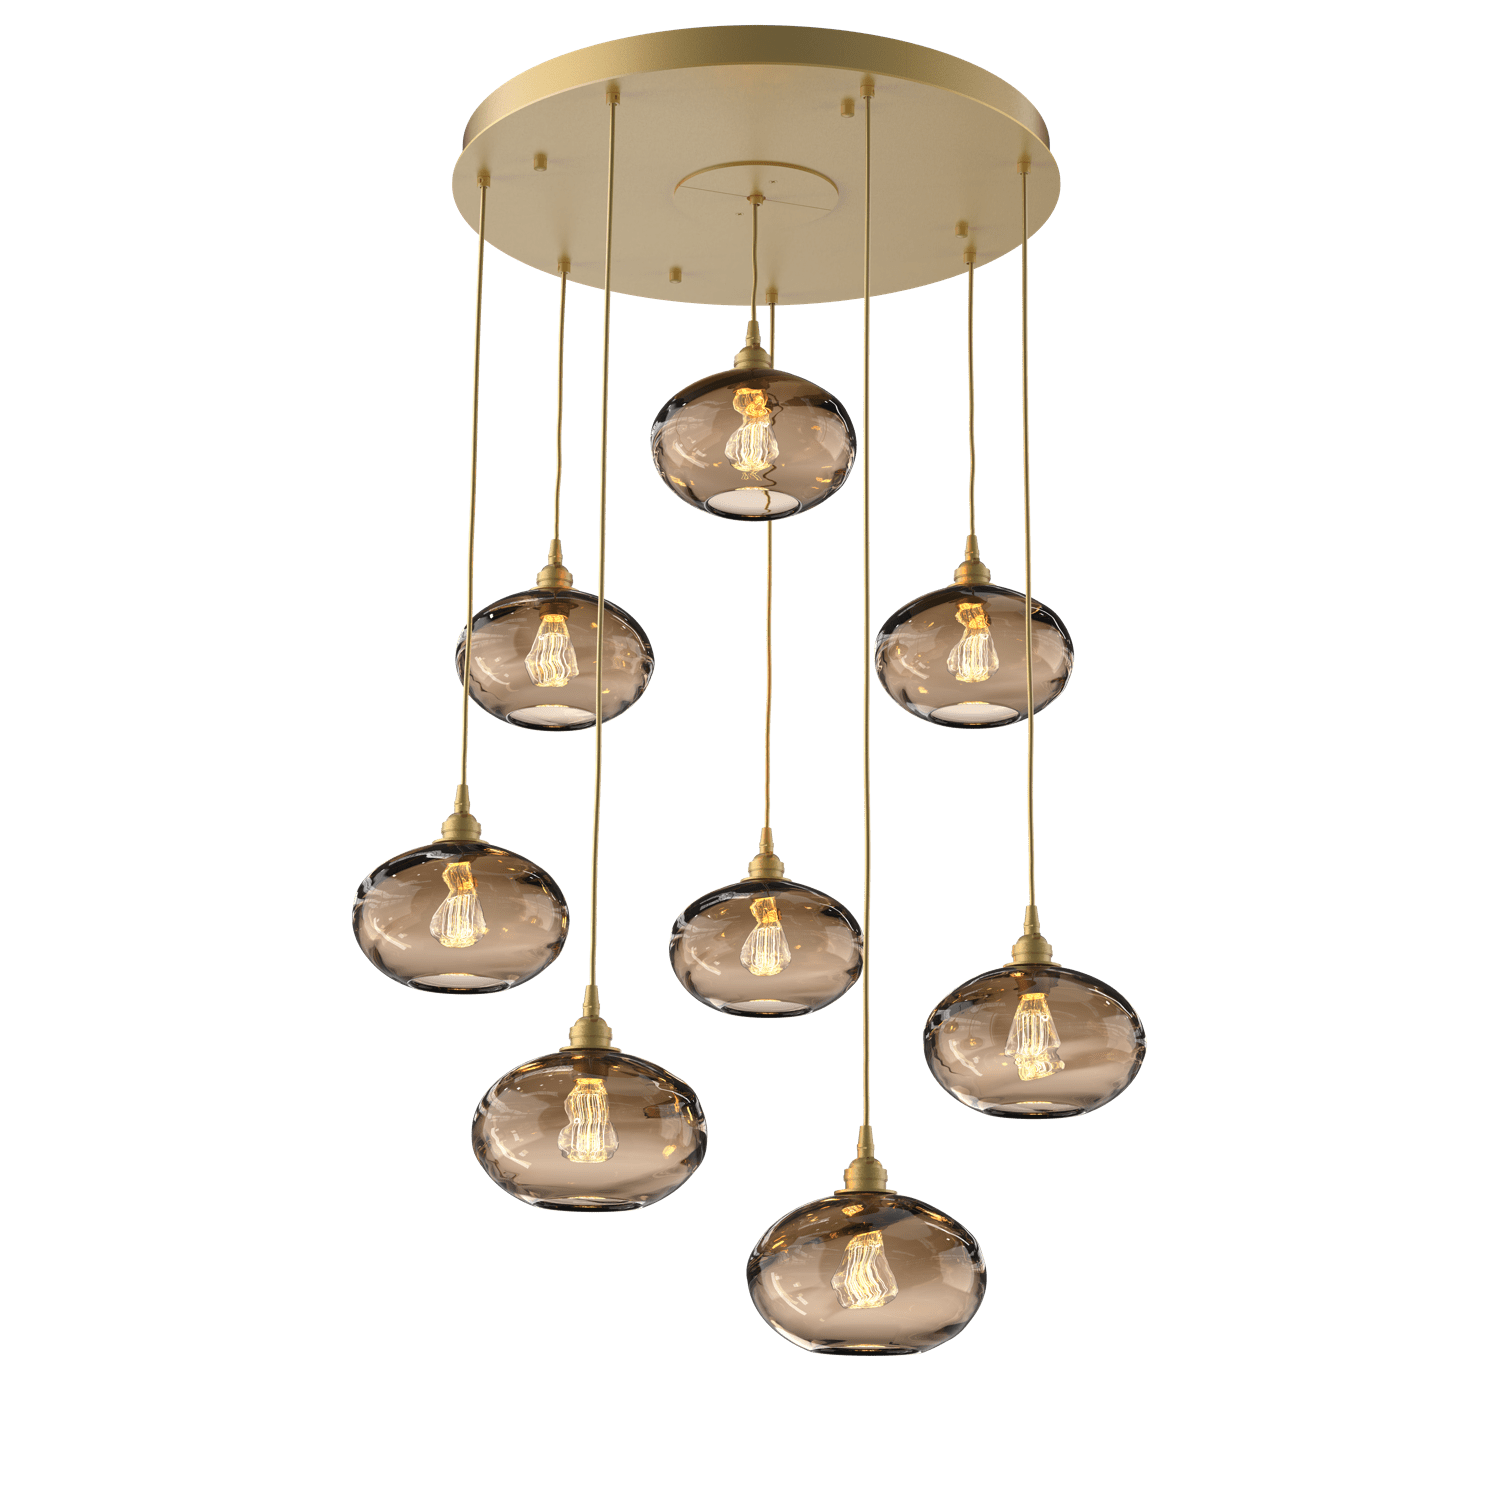 CHB0036-08-GB-OB-Hammerton-Studio-Optic-Blown-Glass-Coppa-8-light-round-pendant-chandelier-with-gilded-brass-finish-and-optic-bronze-blown-glass-shades-and-incandescent-lamping